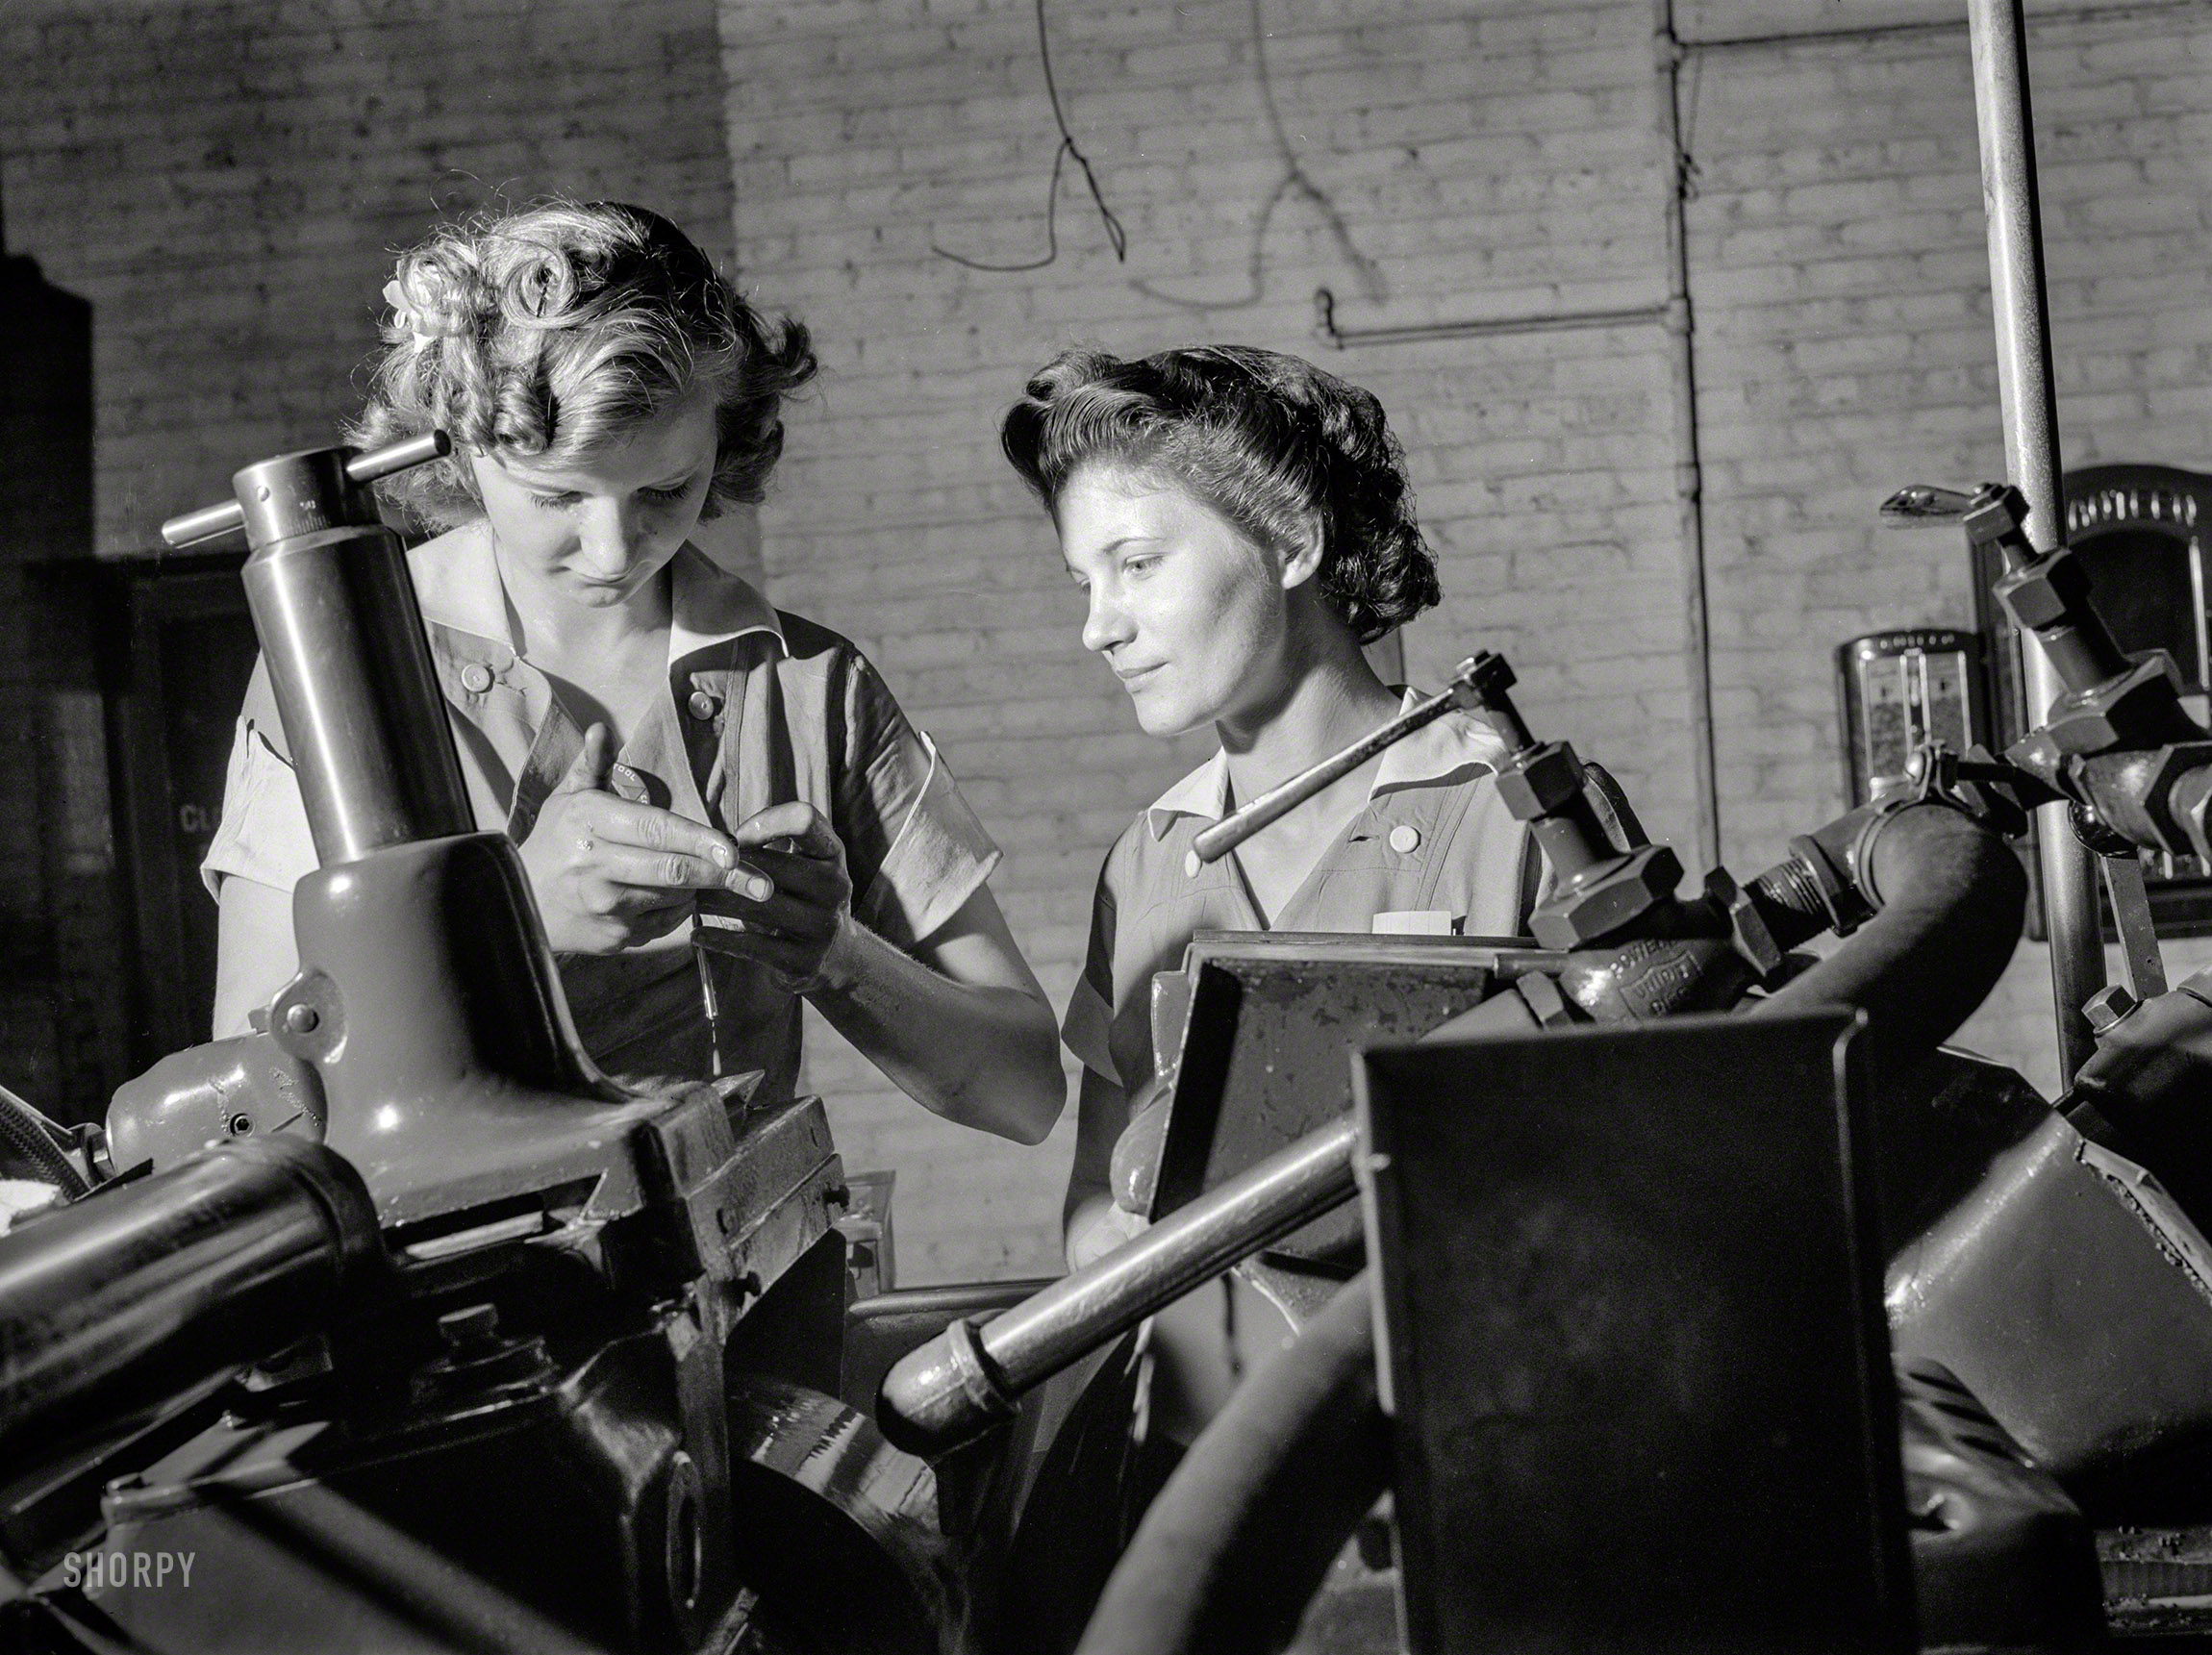 August 1942. Republic Drill and Tool Co., Chicago. "Pioneers of the production line, these two young workers are among the first women ever to operate a center&shy;less grinder, a machine requiring both the knowledge of precision measuring inst&shy;ruments, and considerable experience and skill in setting up. In this Midwest drill and tool plant, manned almost exclusively by women, centerless grinders have been efficiently operated by women for more than a year, and company prod&shy;uction figures have continued to soar." Medium-format nitrate negative by Ann Rosener for the Office of War Information. View full size.